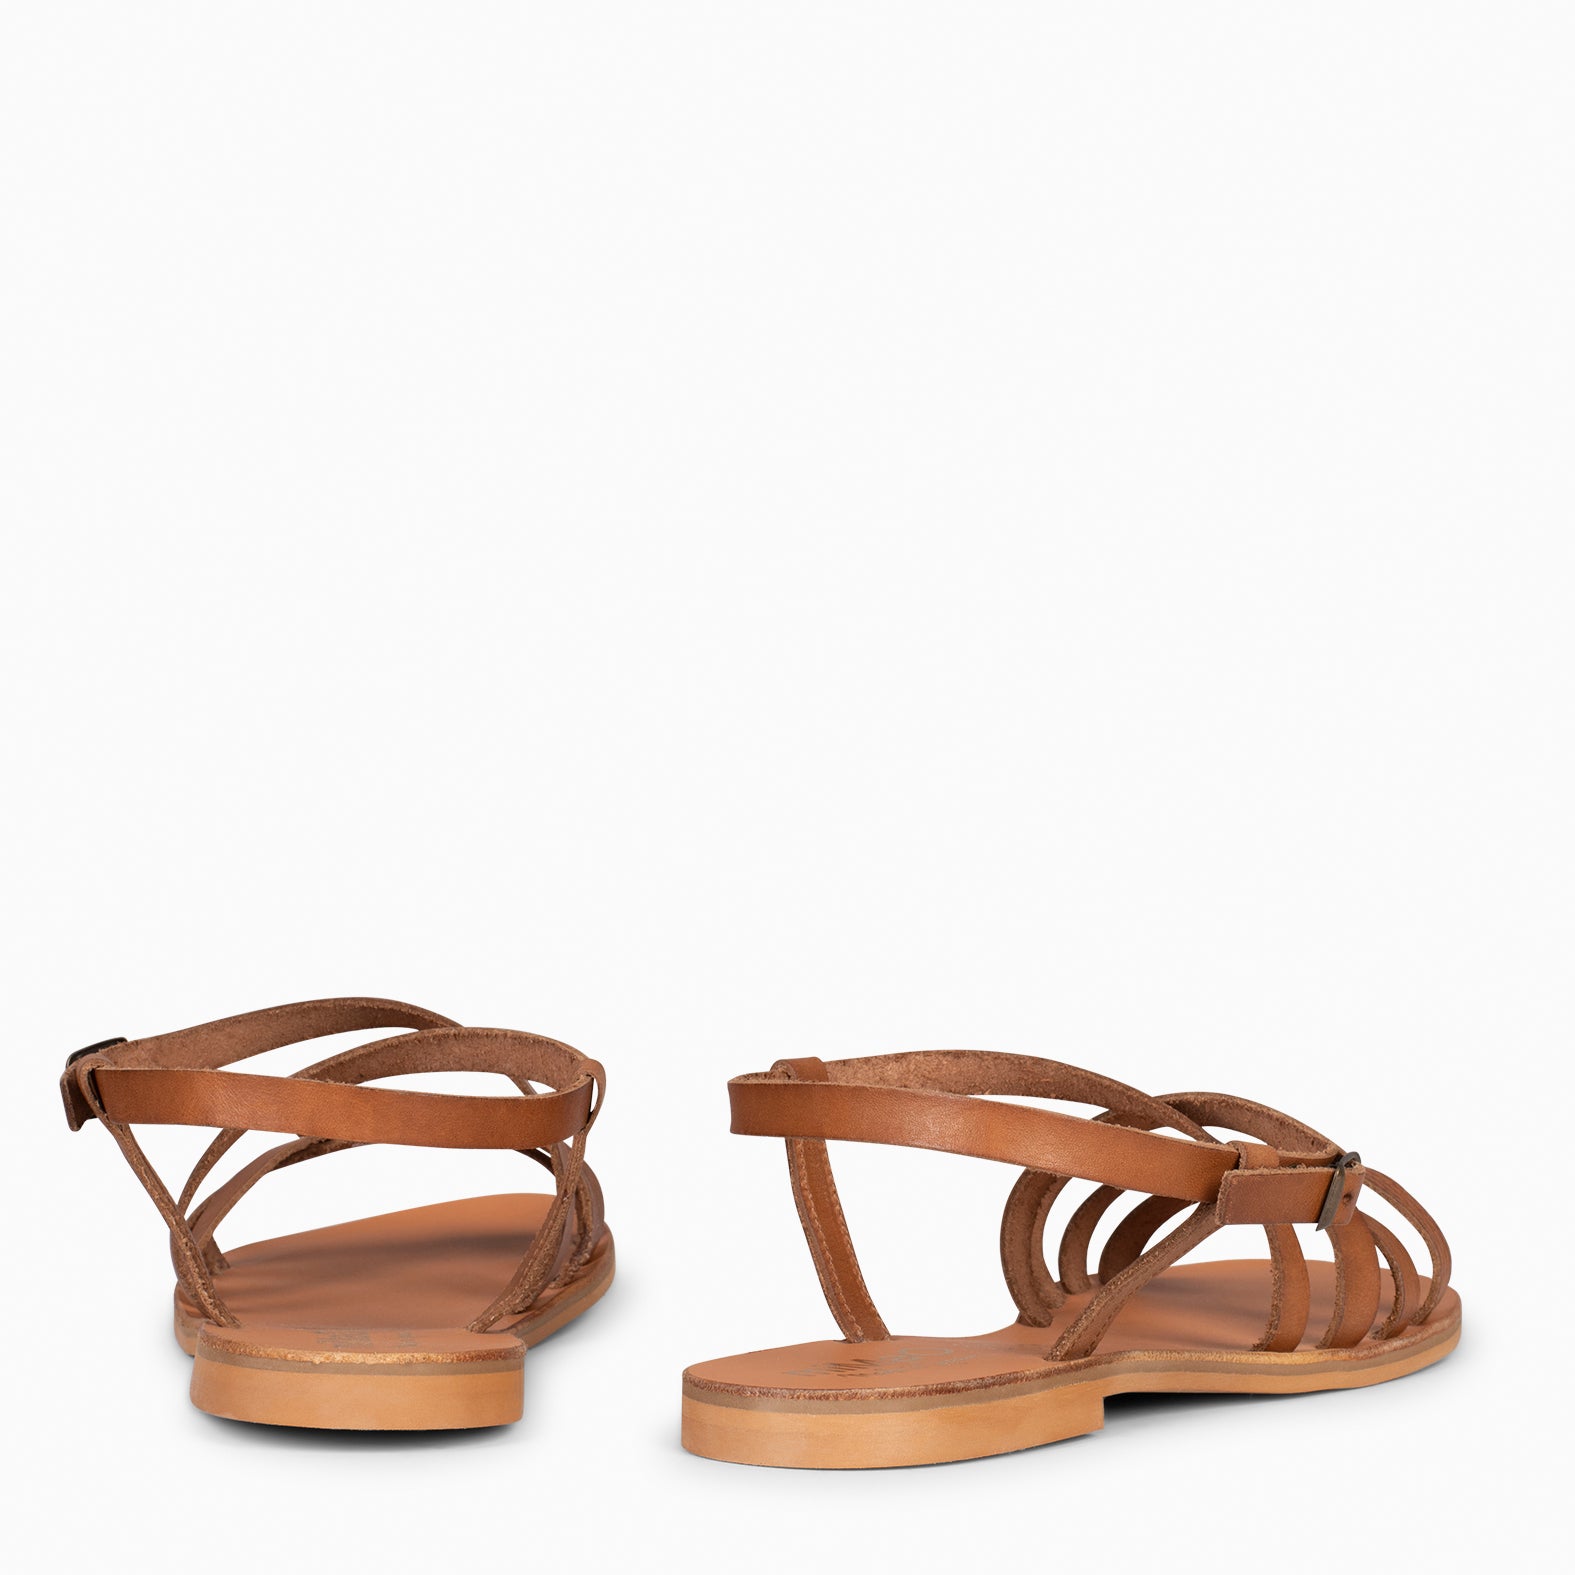 IXORA – CAMEL flat sandals with buckle